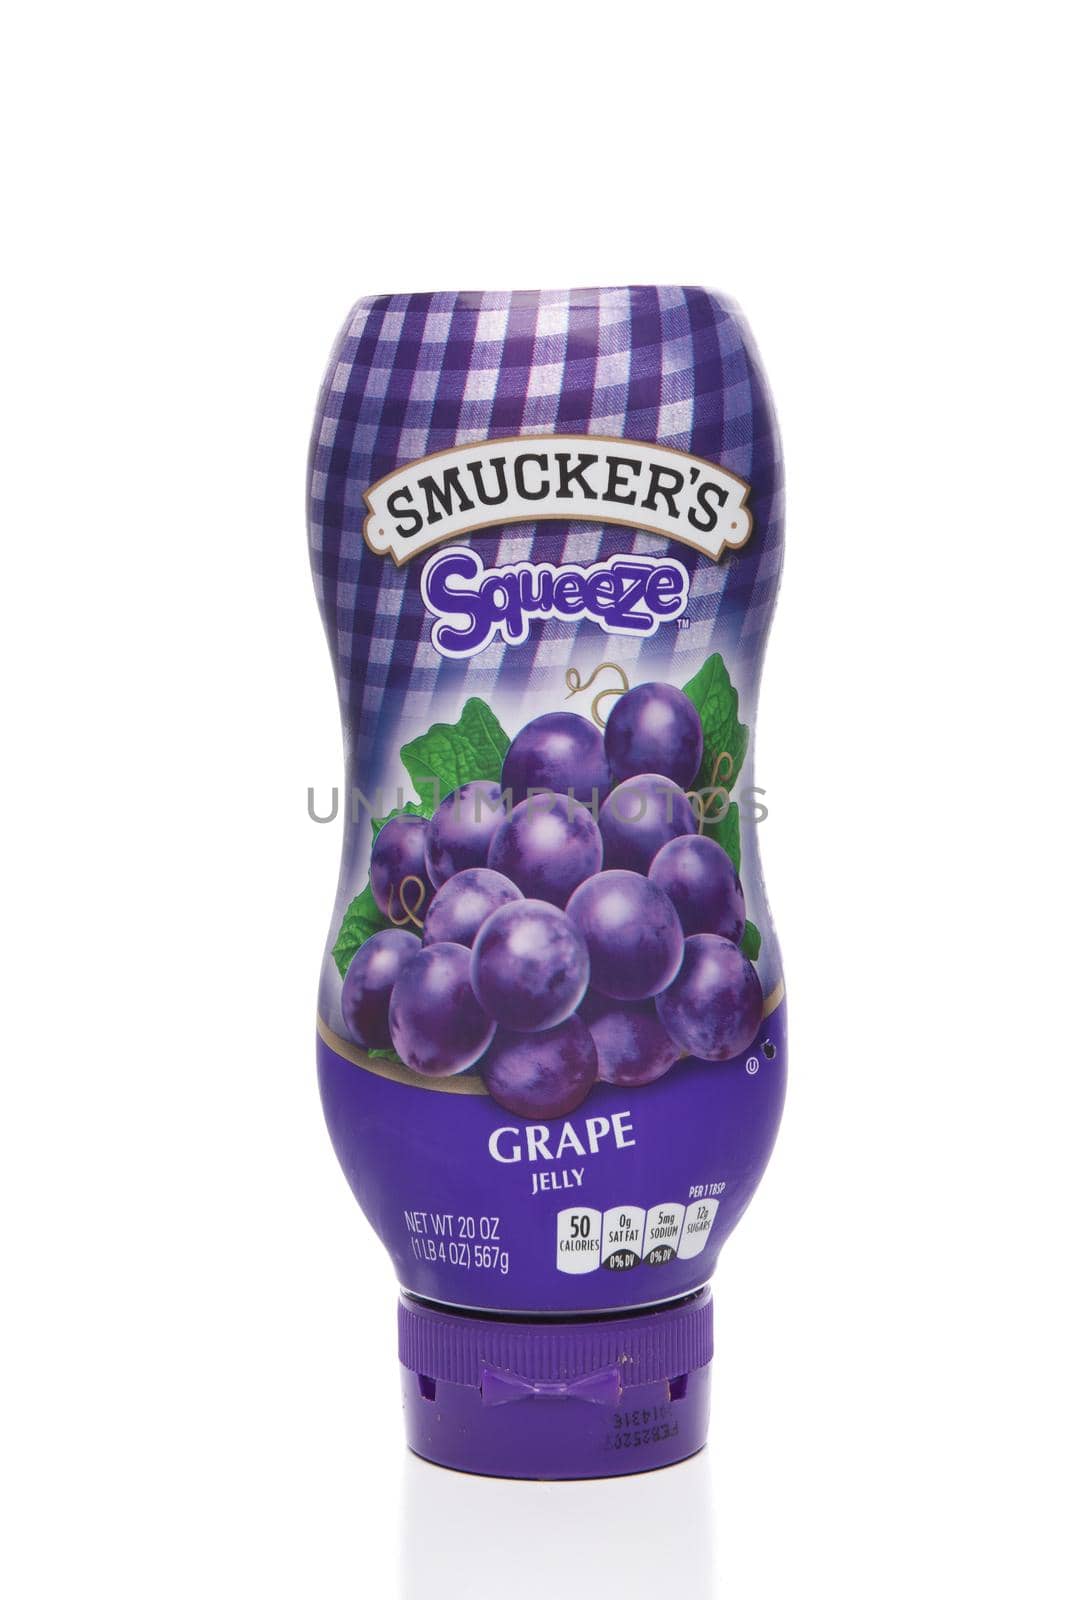 A 20 ounce plastic squeeze bottle of Smuckers Grape Jelly. by sCukrov